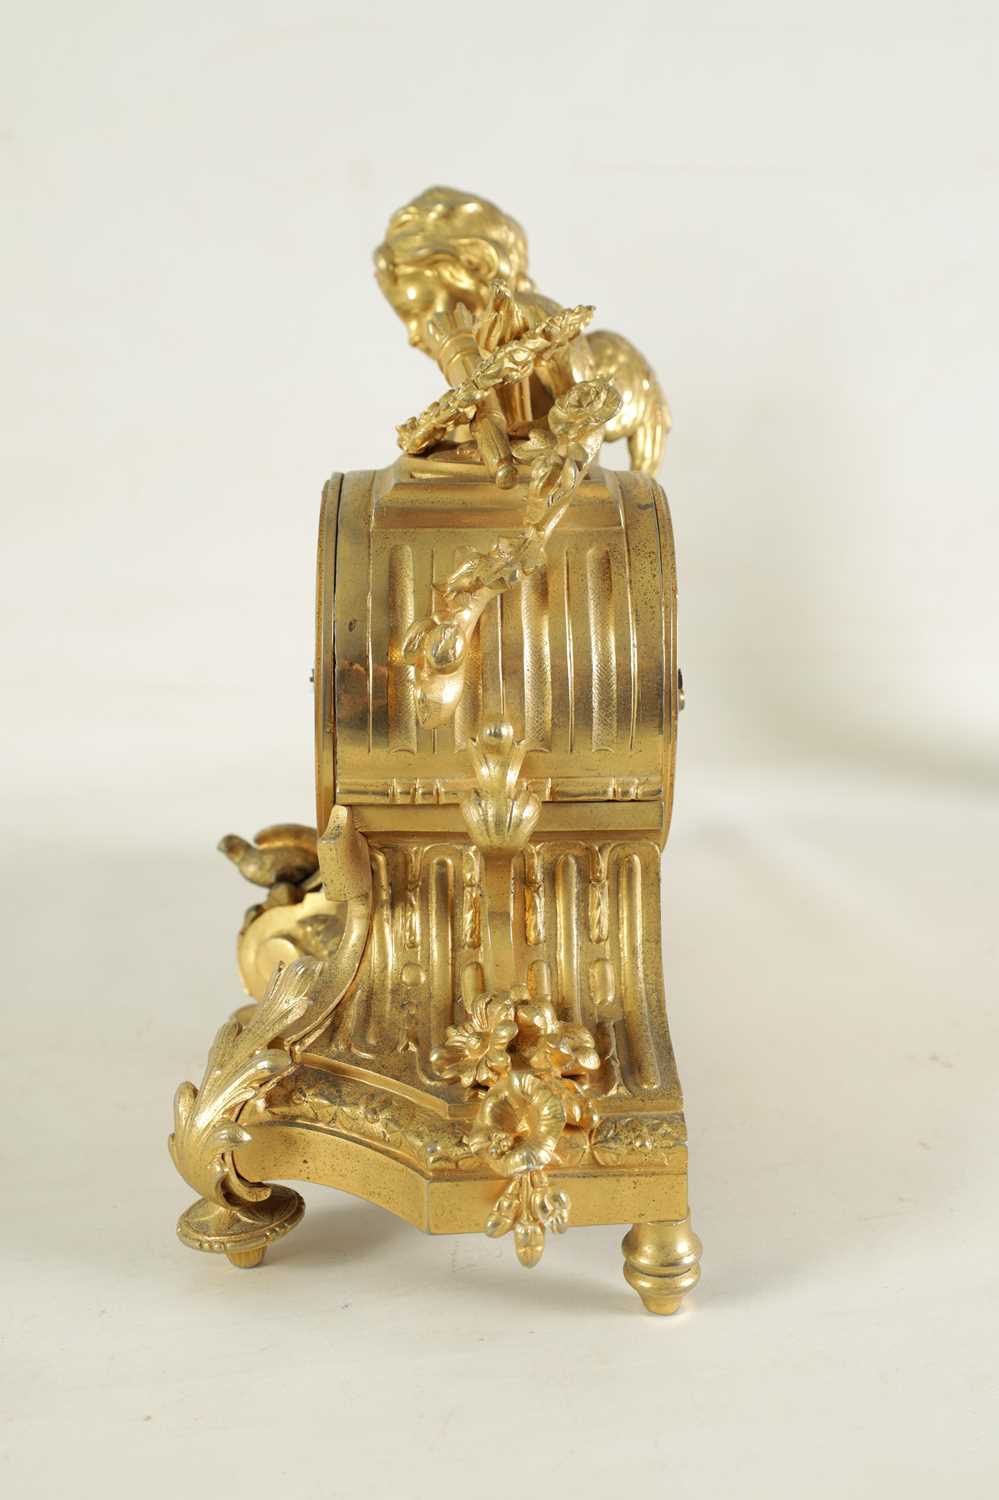 A LATE 19TH CENTURY FRENCH GILT METAL AND PORCELAIN FIGURAL MANTEL CLOCK - Image 13 of 13